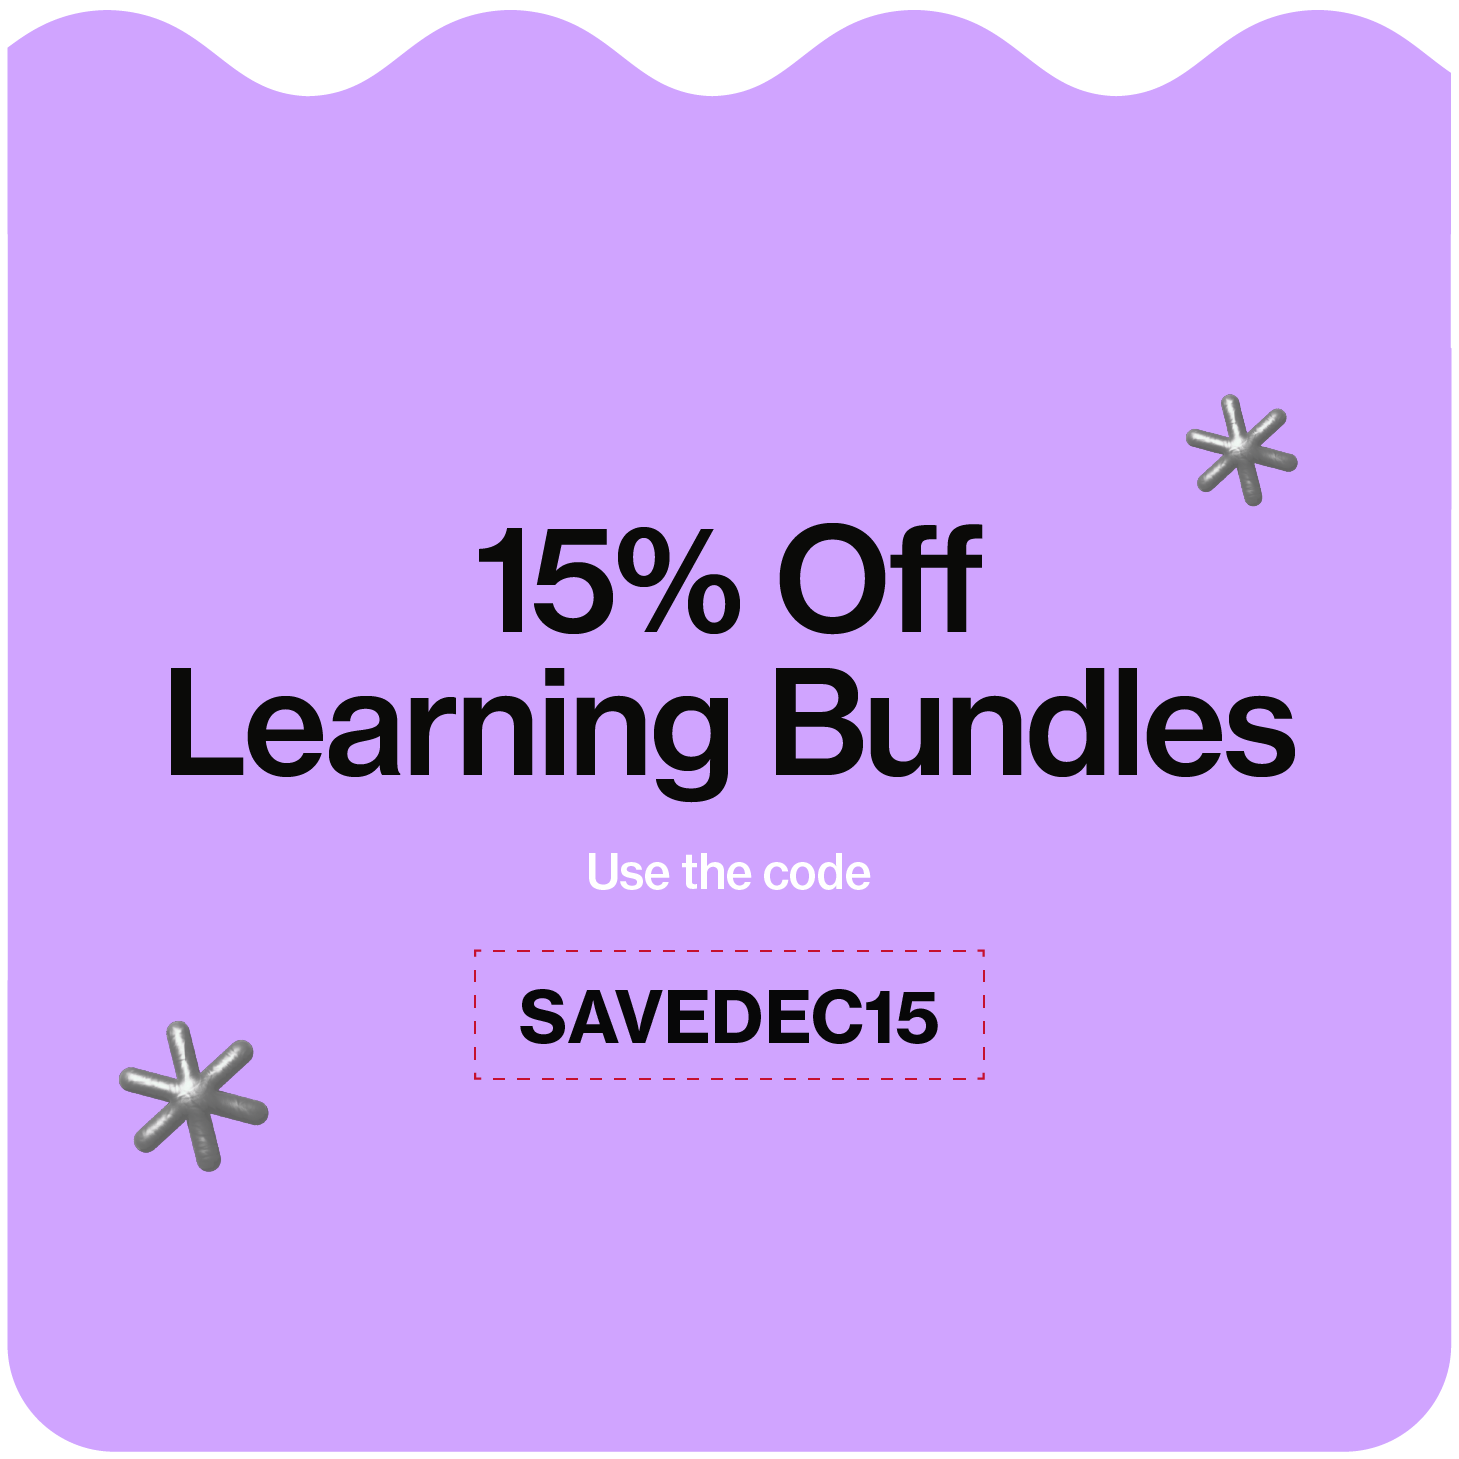 15% Off Learning Bundles.  Use the code: SAVEDEC15